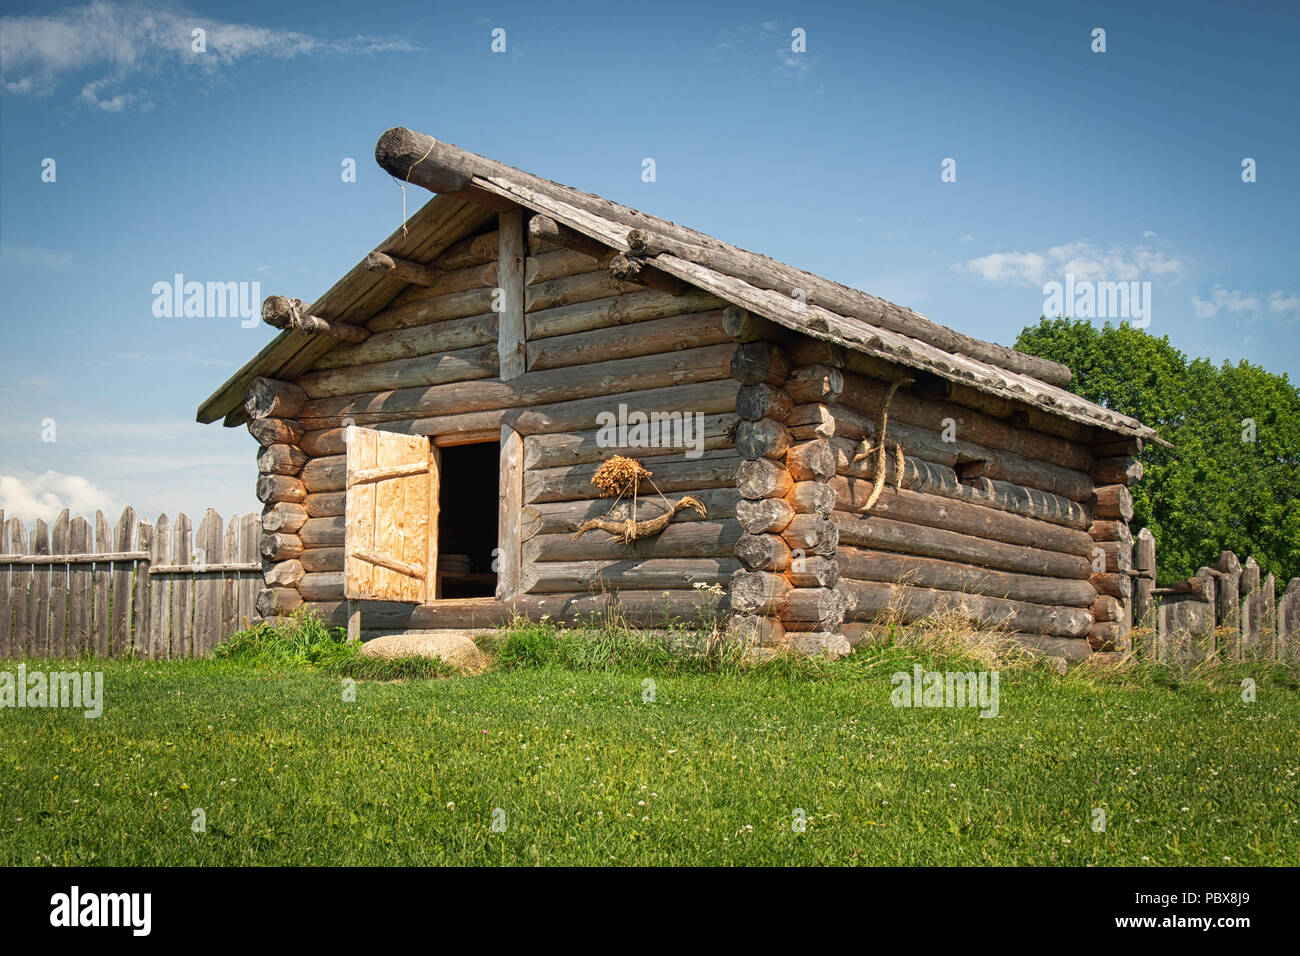 Ancient log house in a country side in a sunny day Stock Photo